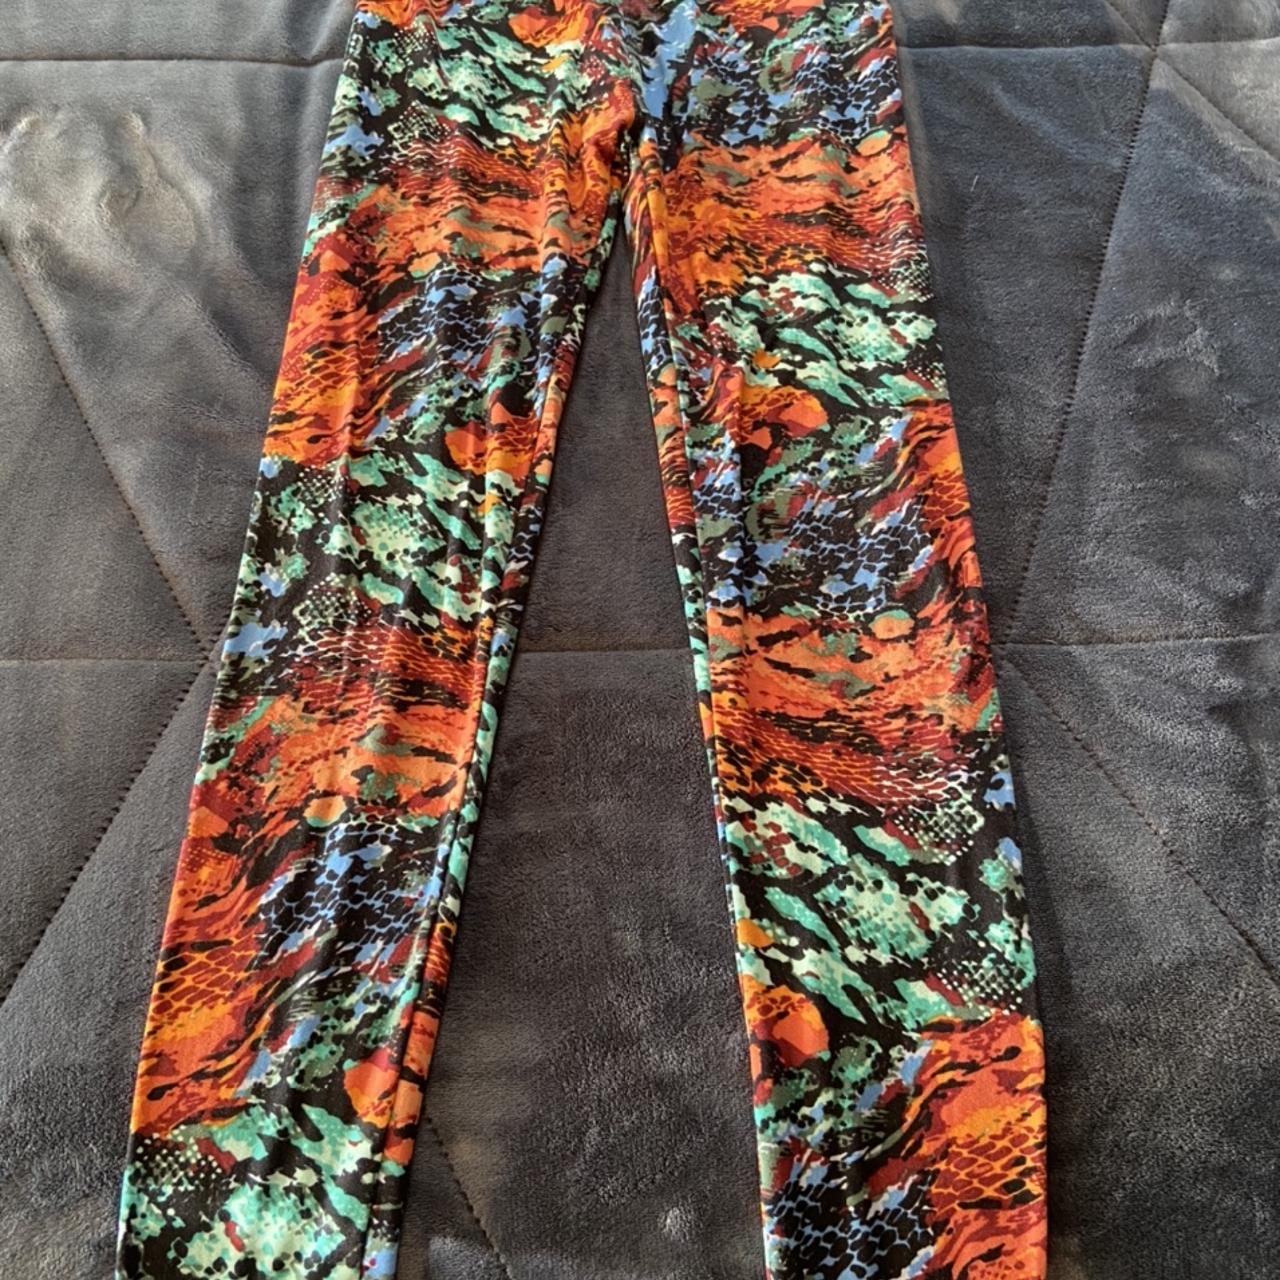 LuLaRoe Leggings Abstract Print One Size Fits Most - Depop